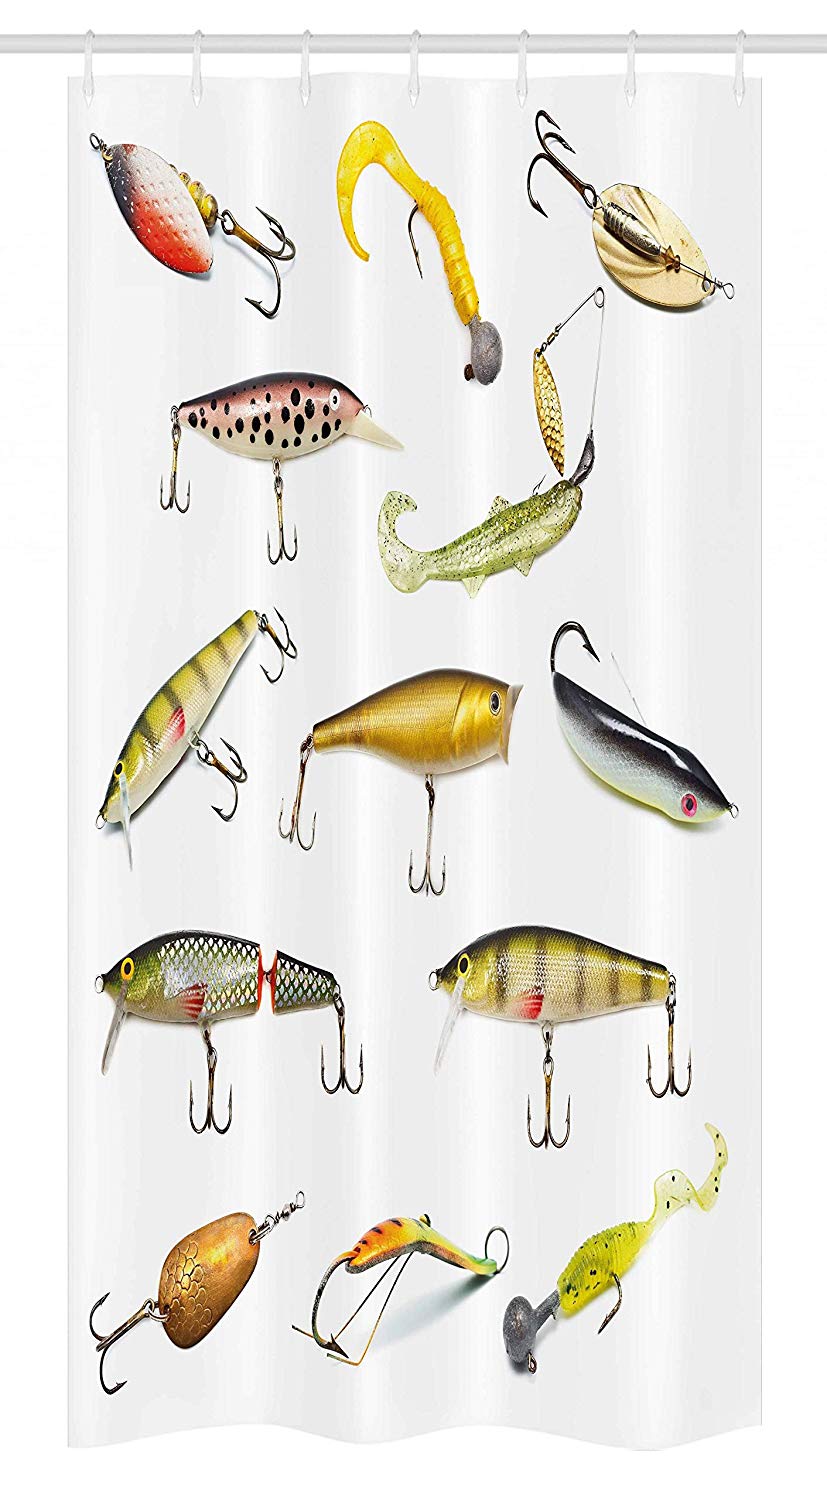 Ambesonne Fishing Stall Shower Curtain, Fishing Tackle Bait for Spearing Trapping Catching Aquatic Animals Molluscs Design, Fabric Bathroom Decor Set with Hooks, 36